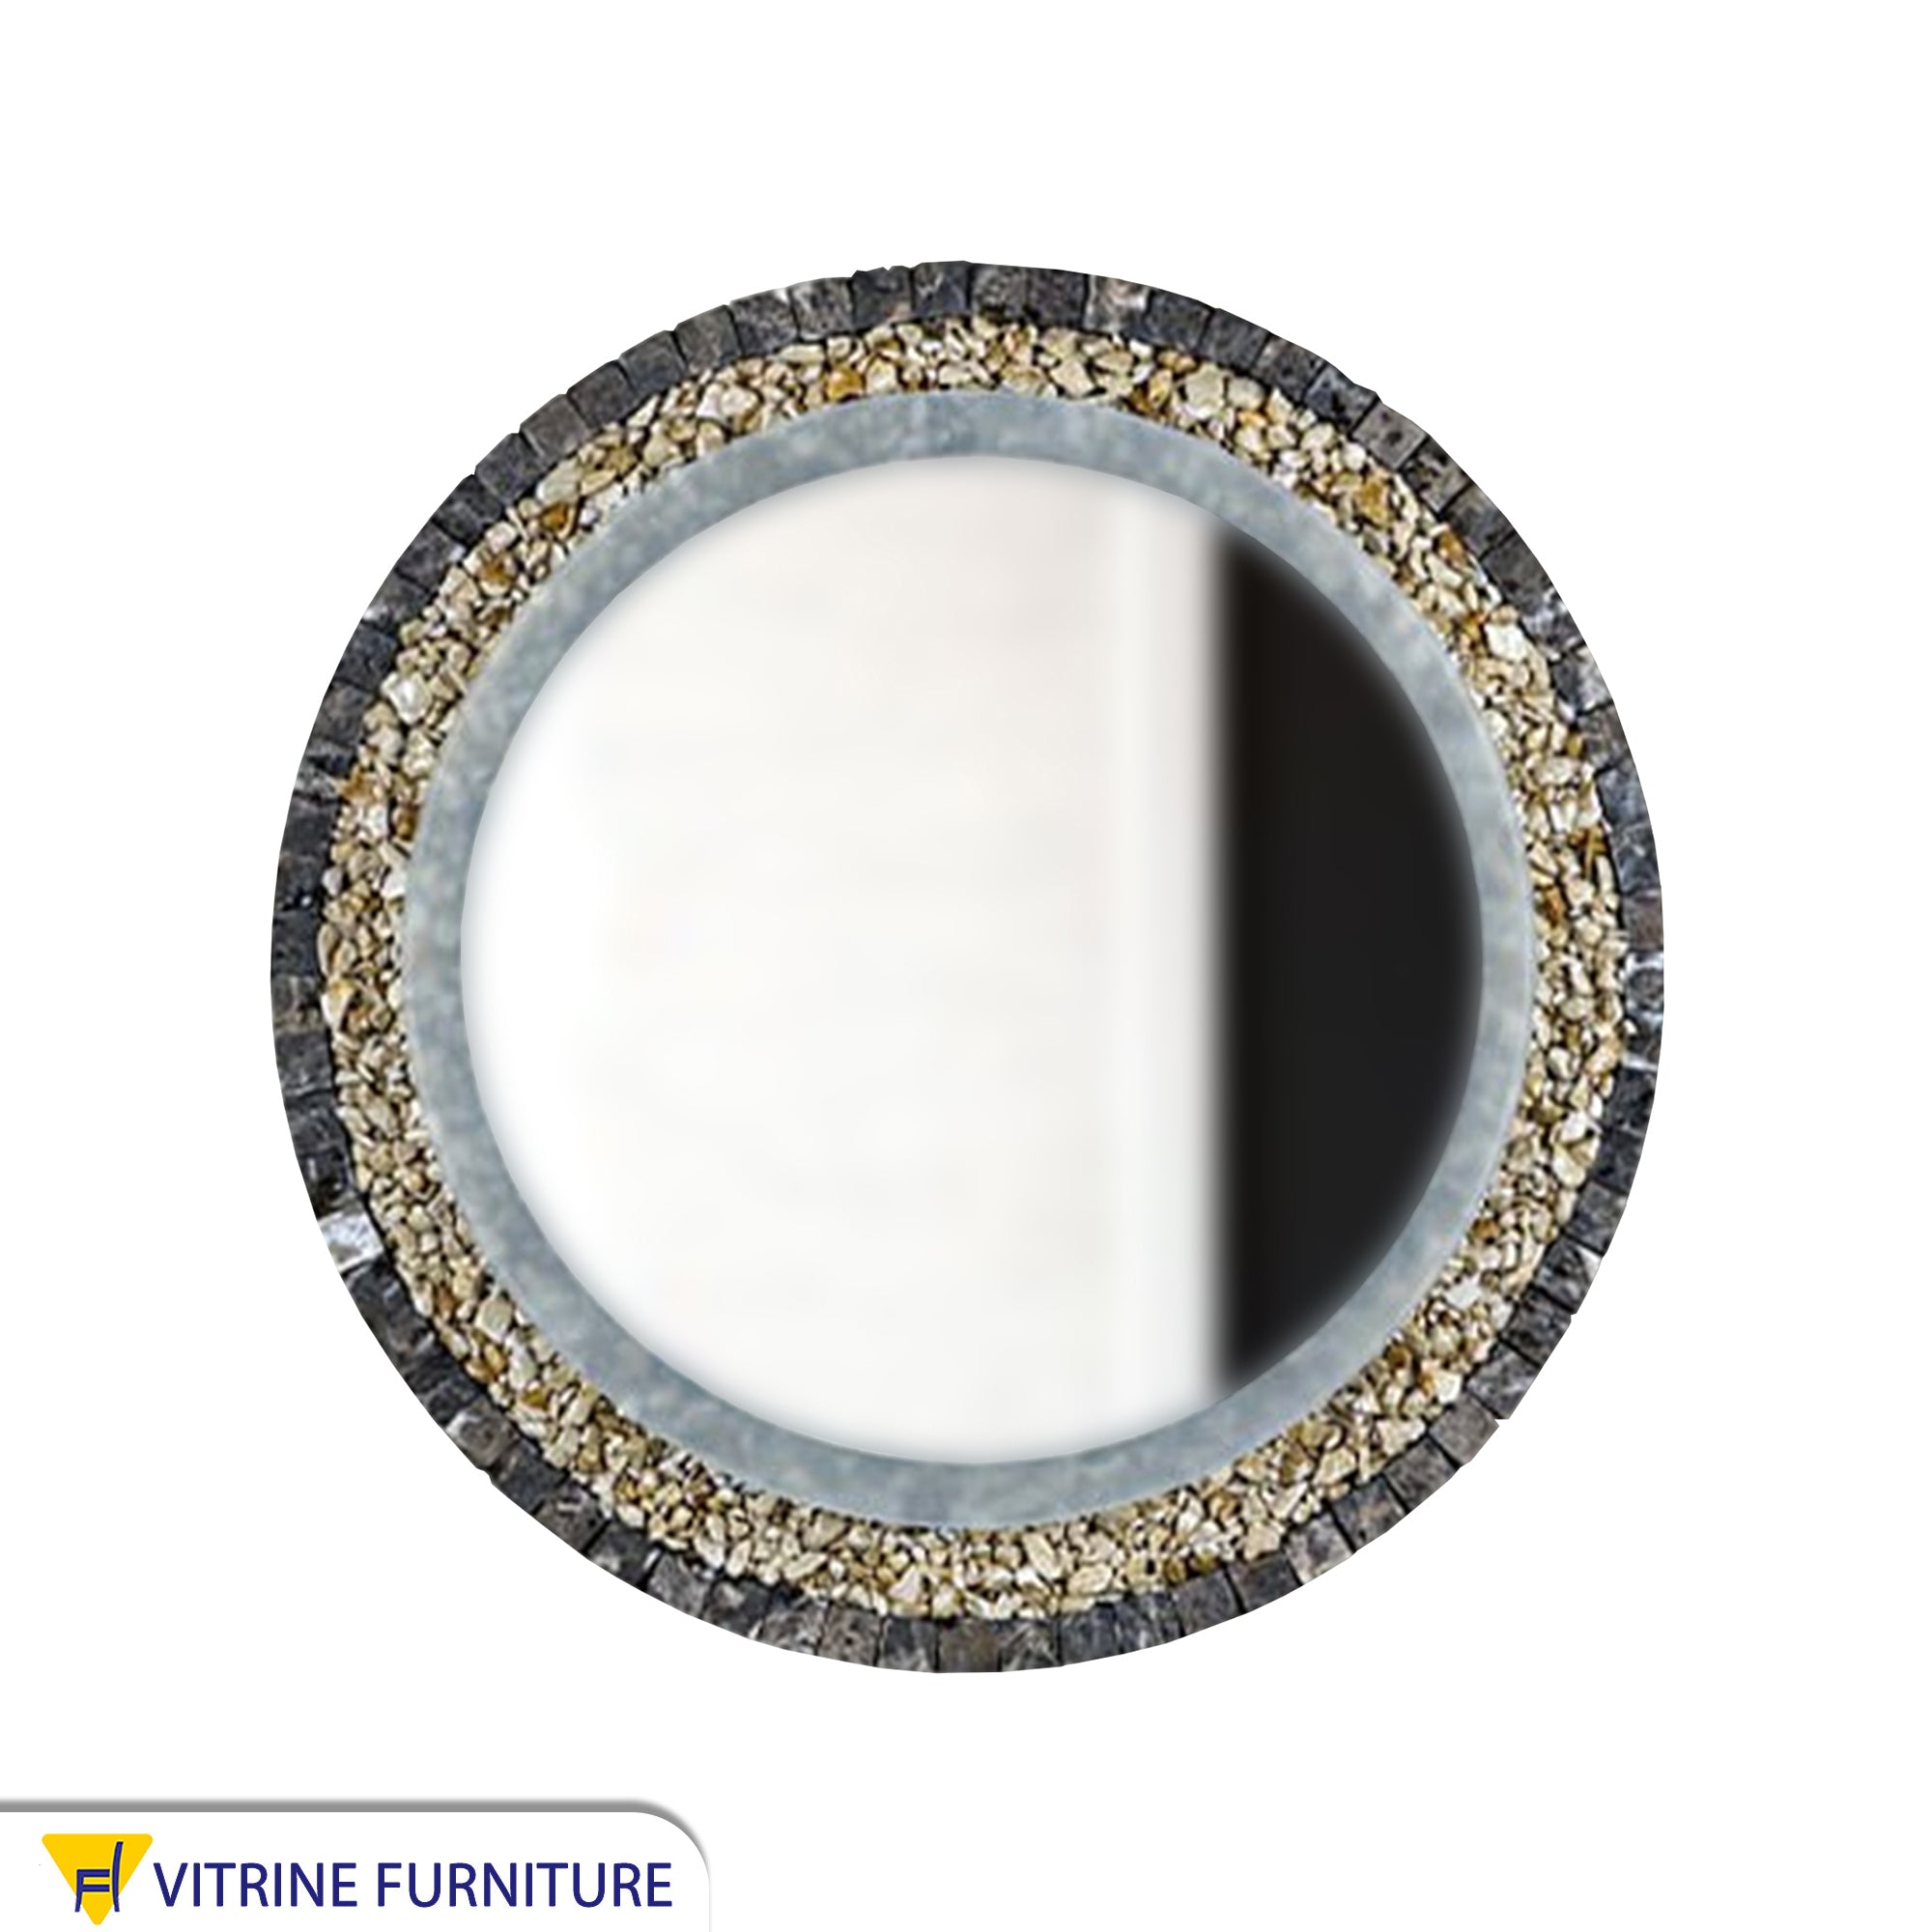 Circular mirror with black marble and stone frame